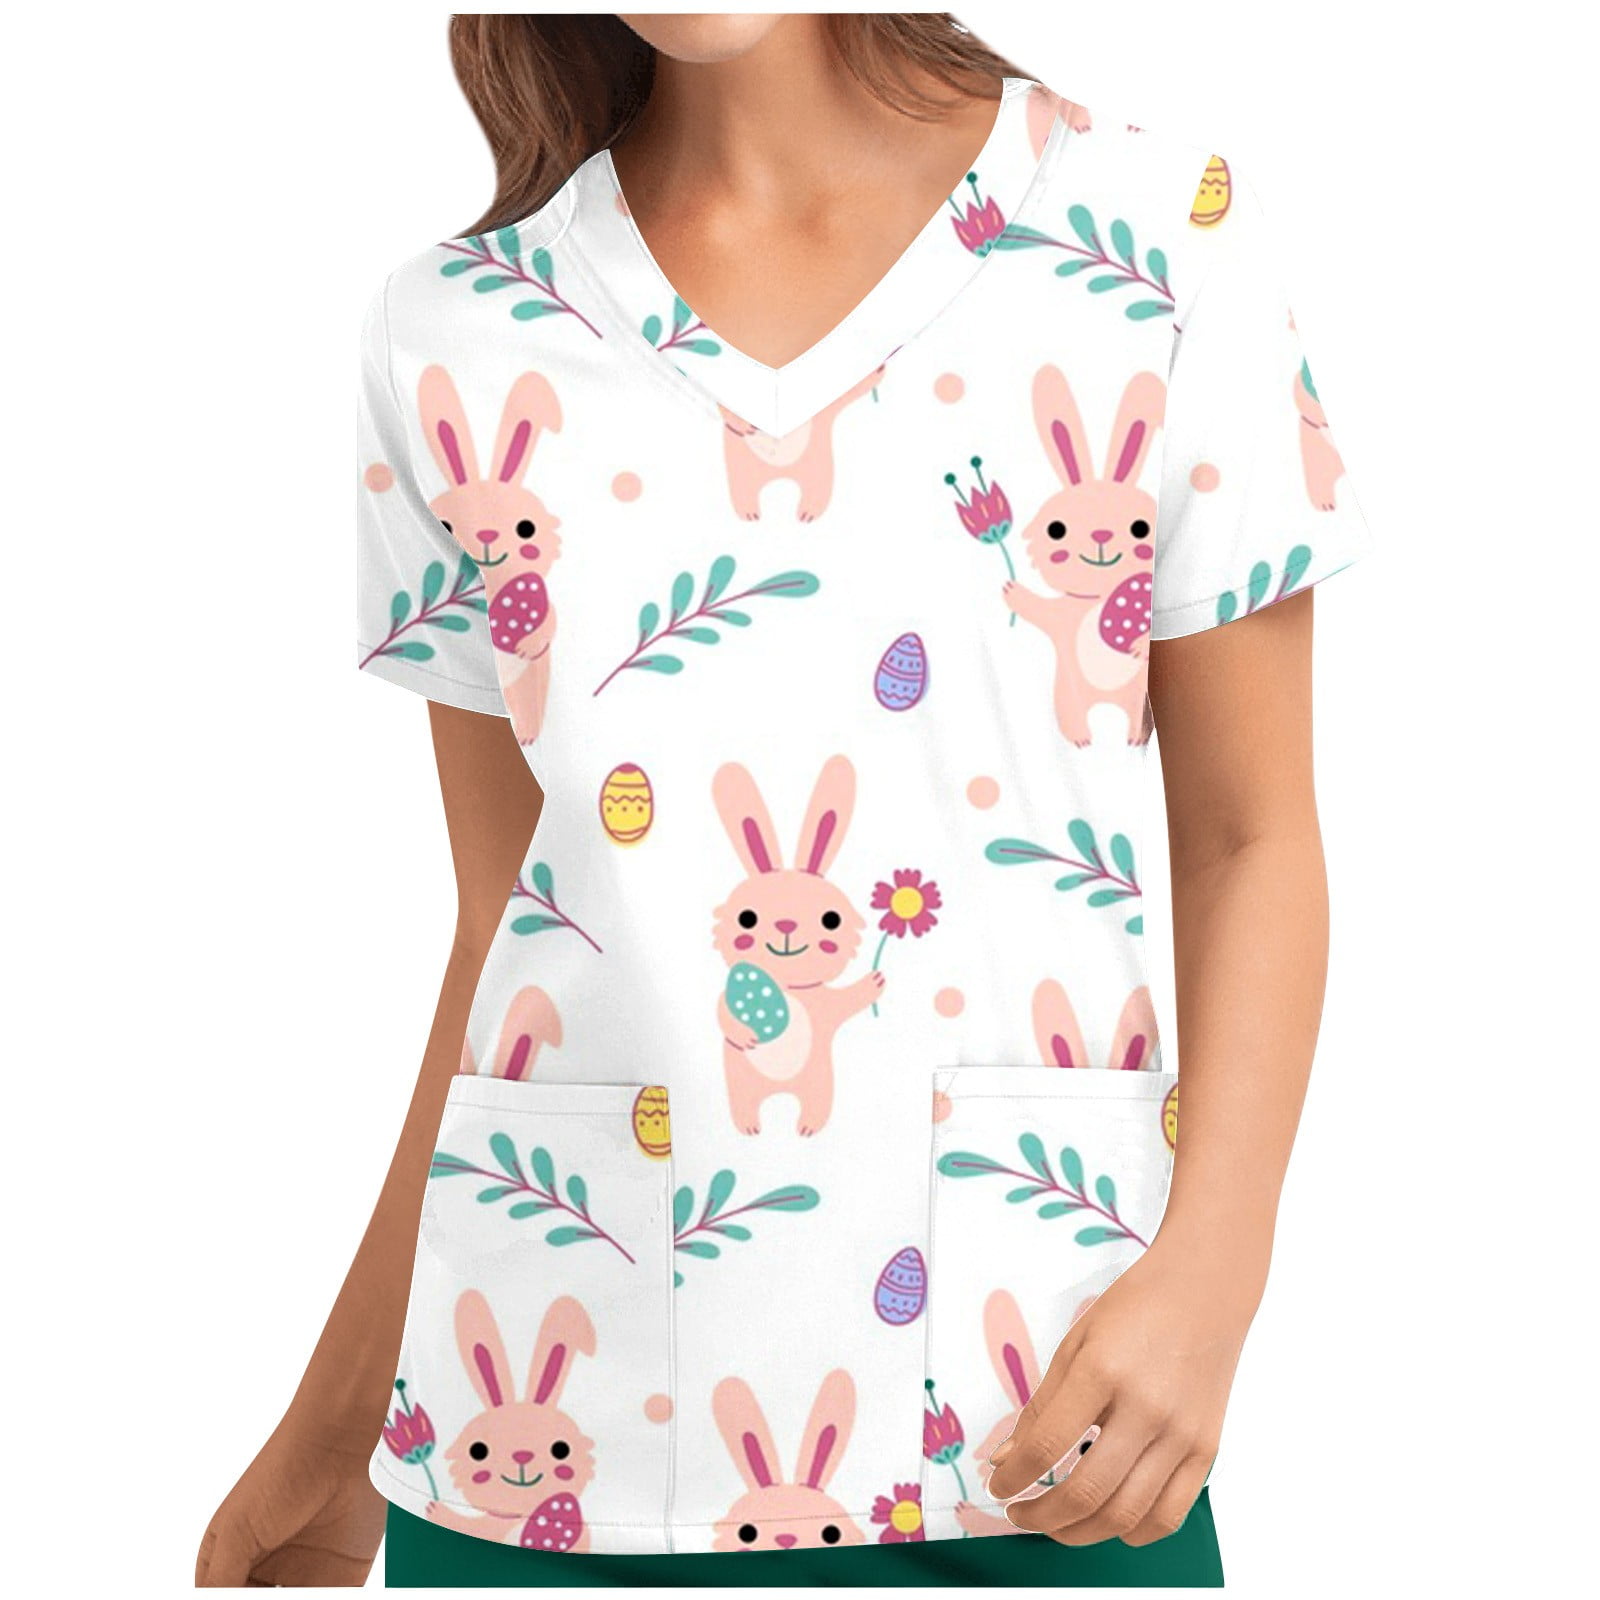 Women Graphic Tshirts Womens Short Sleeve Workout Tops Floral Leopard Easter Bunny Printing O-Neck Basic Tee Shirts 